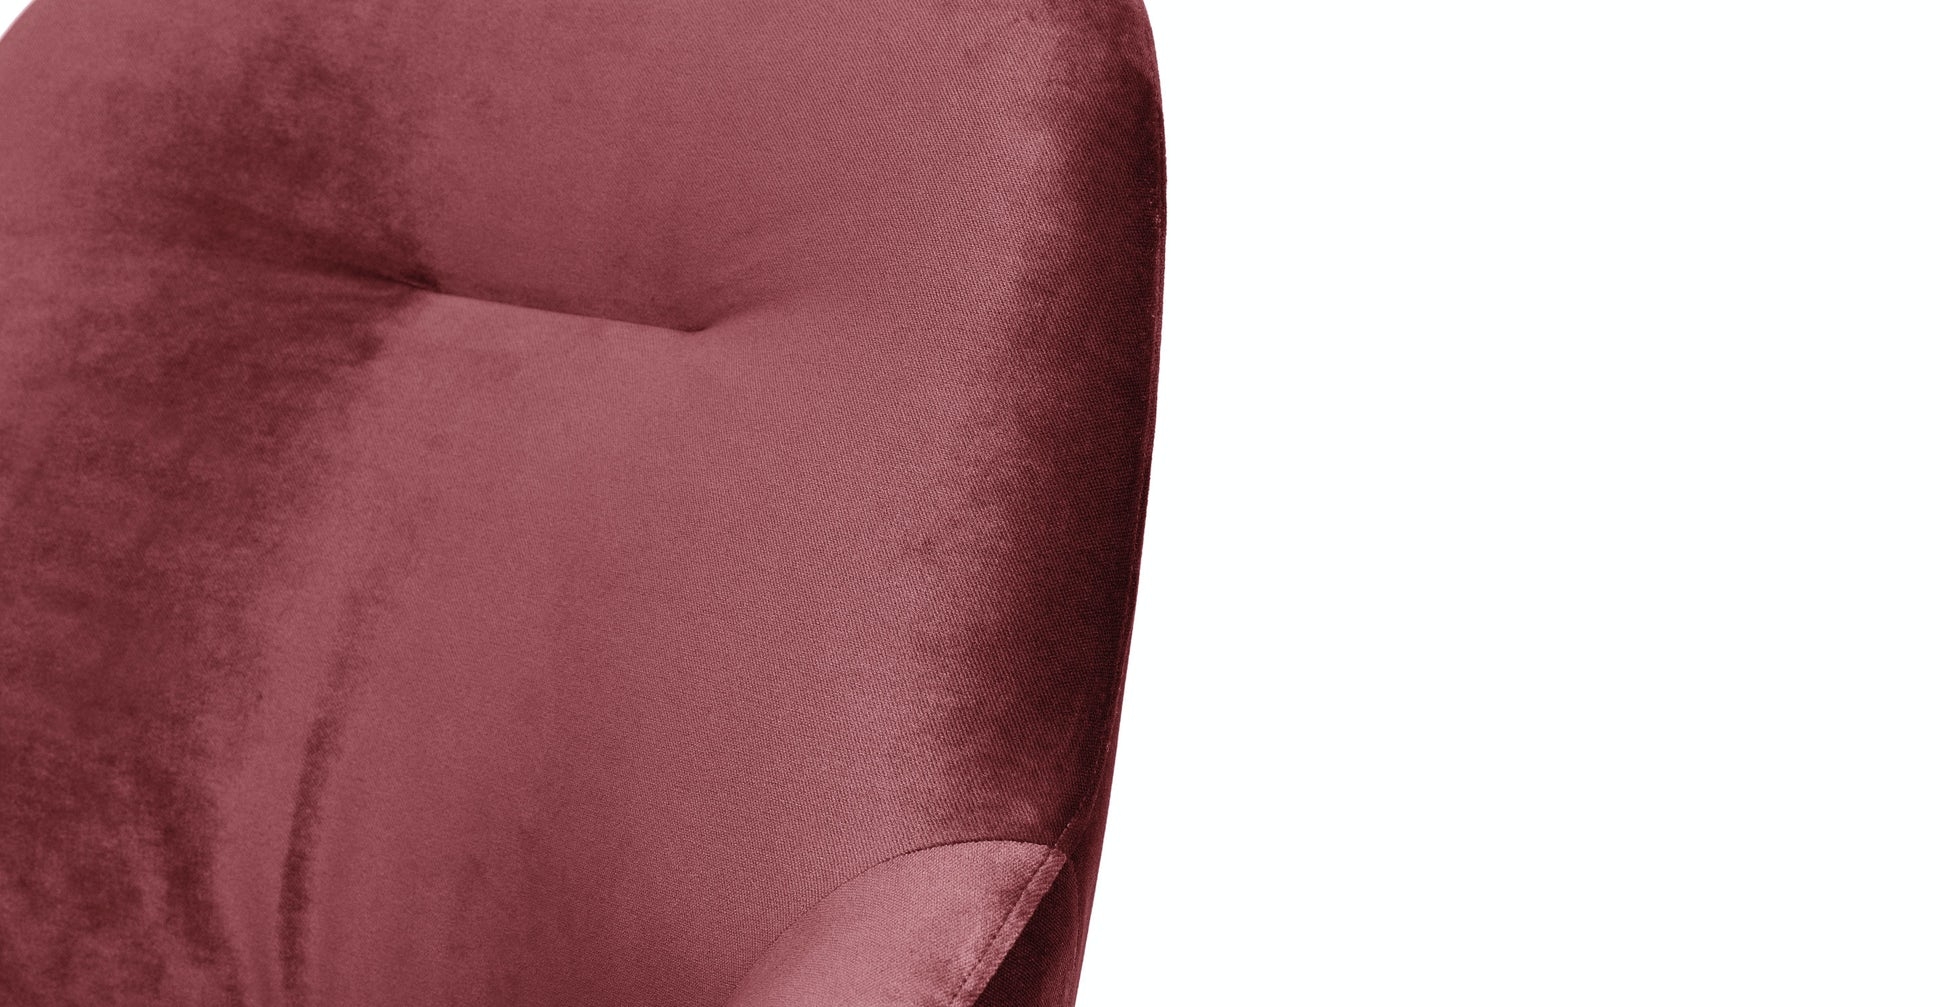 Embrace Rose Pink Chair - Image 4